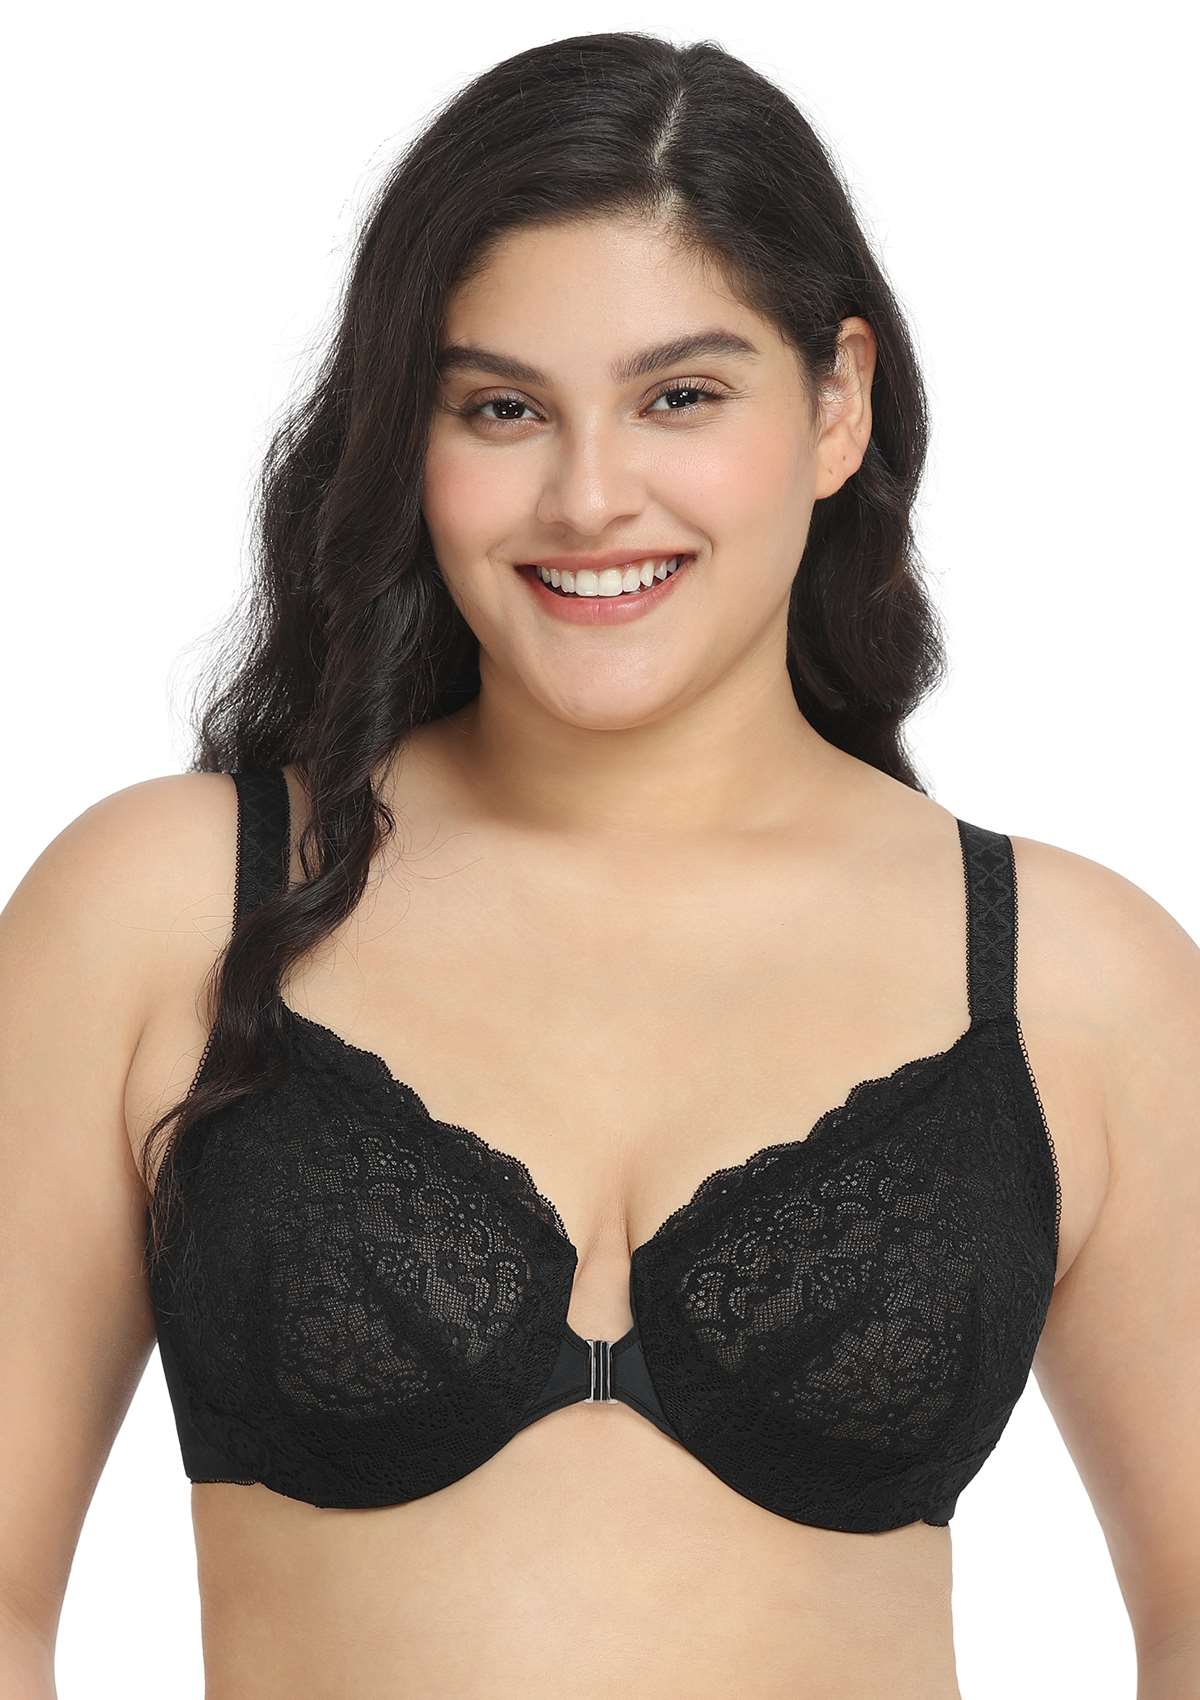 HSIA Nymphaea Front-Close Unlined Retro Floral Lace Back Smoothing Bra - Black / 38 / H